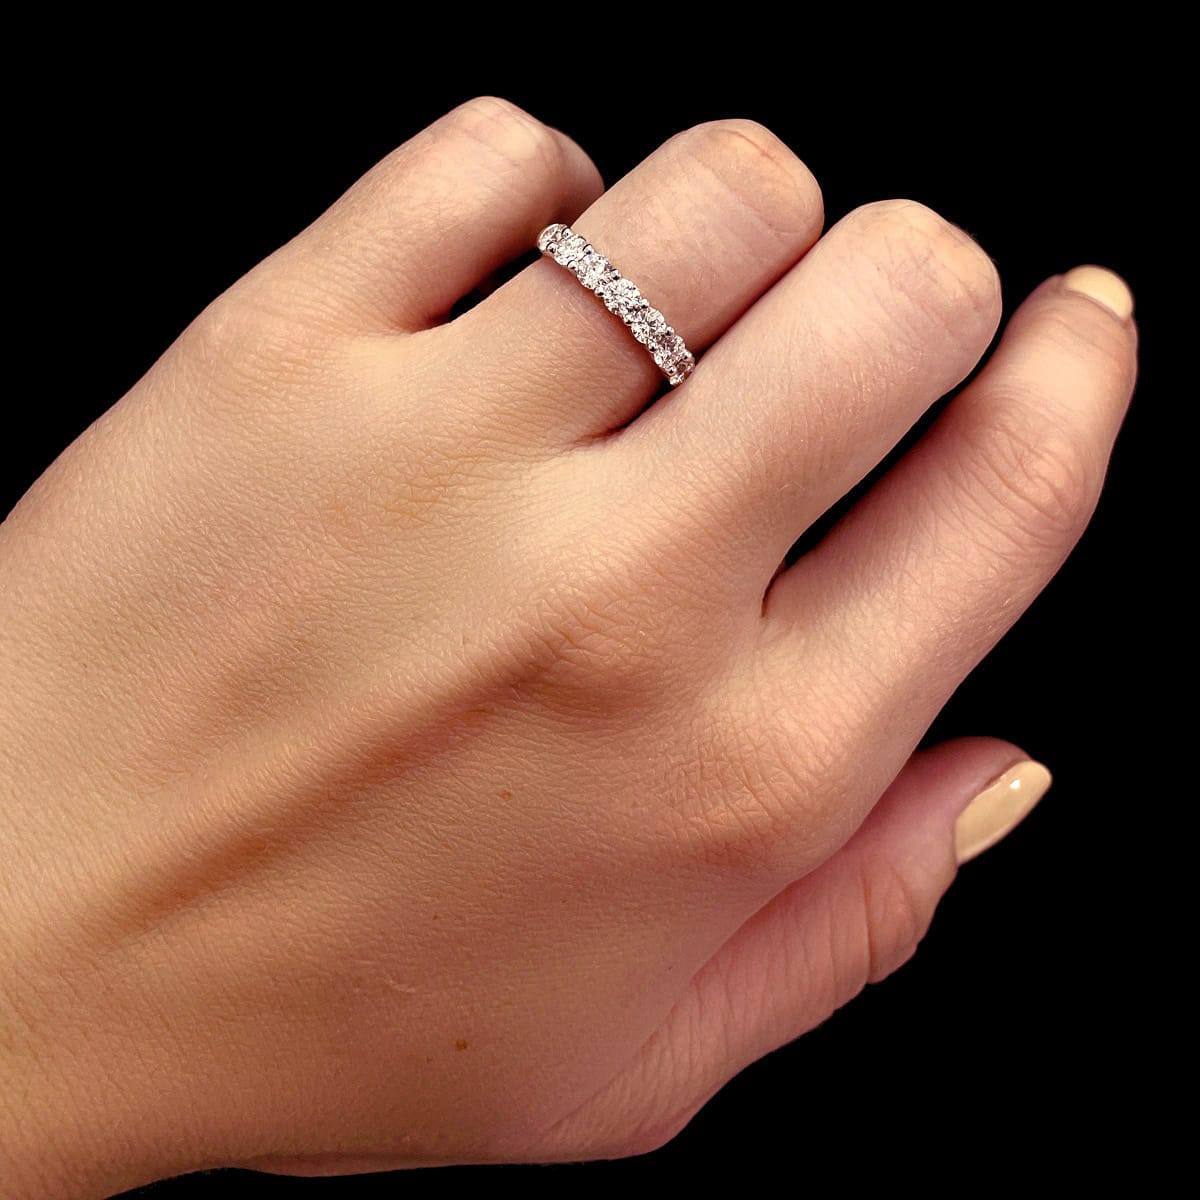 Diamond Bands and Wedding Rings available at LeGassick Diamonds and Jewellery Gold Coast, Australia.